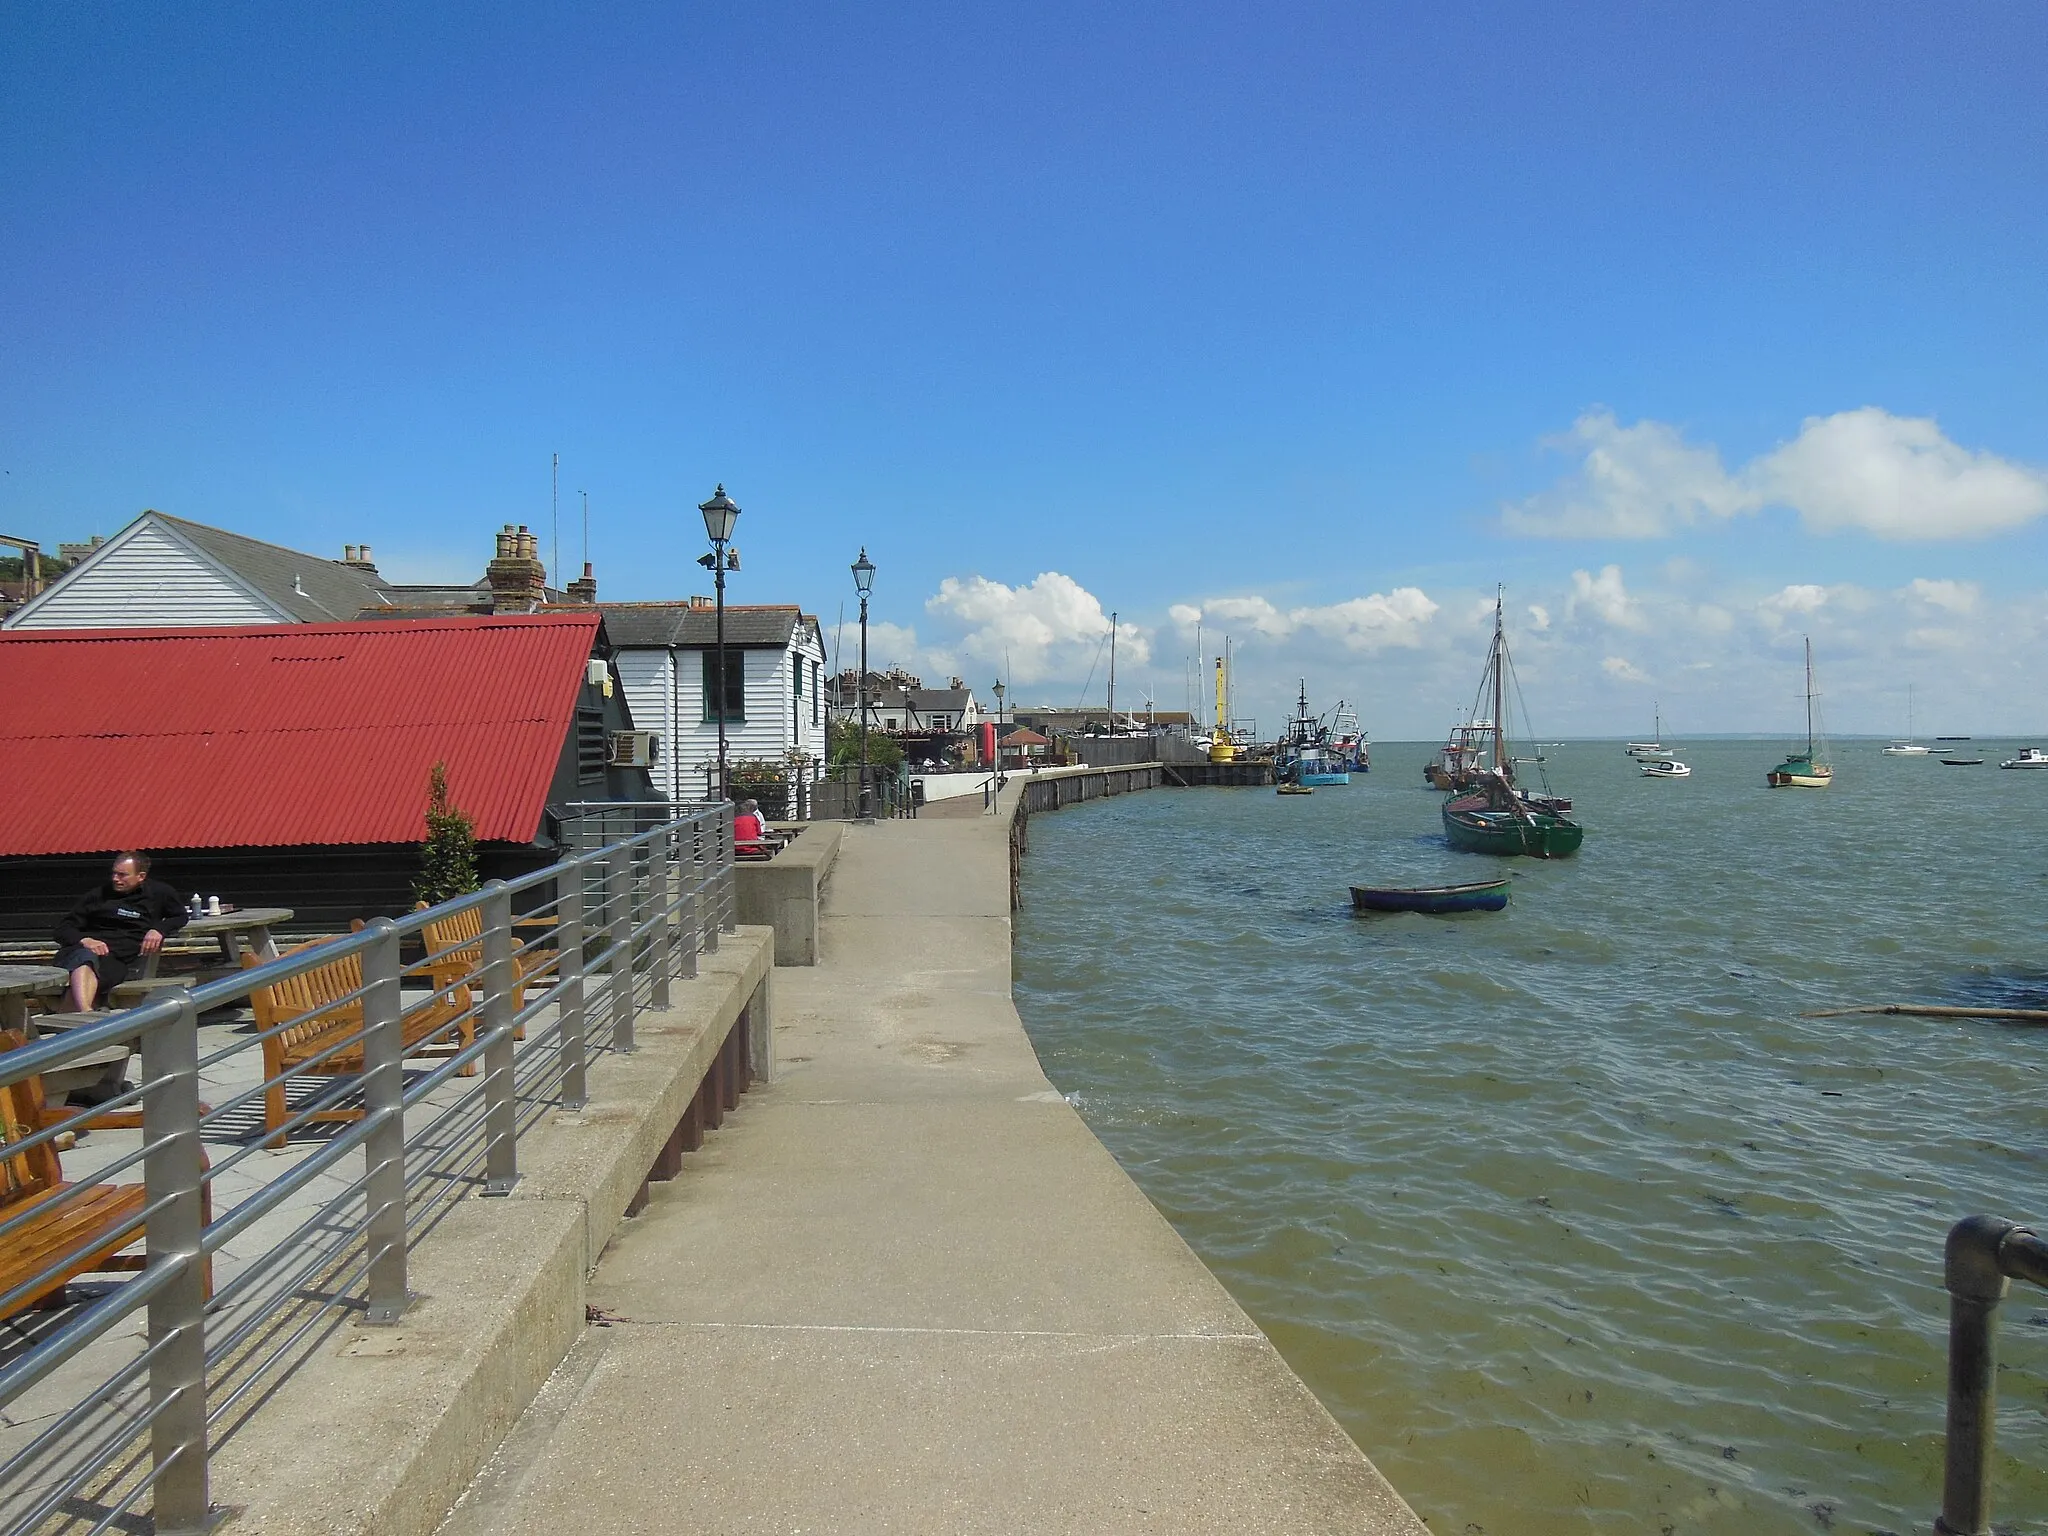 Photo showing: The waterfront of Old Leigh at Leigh-on-Sea in the English county of Essex, at about high tide. For more information, see Wikipedia article Leigh-on-Sea.